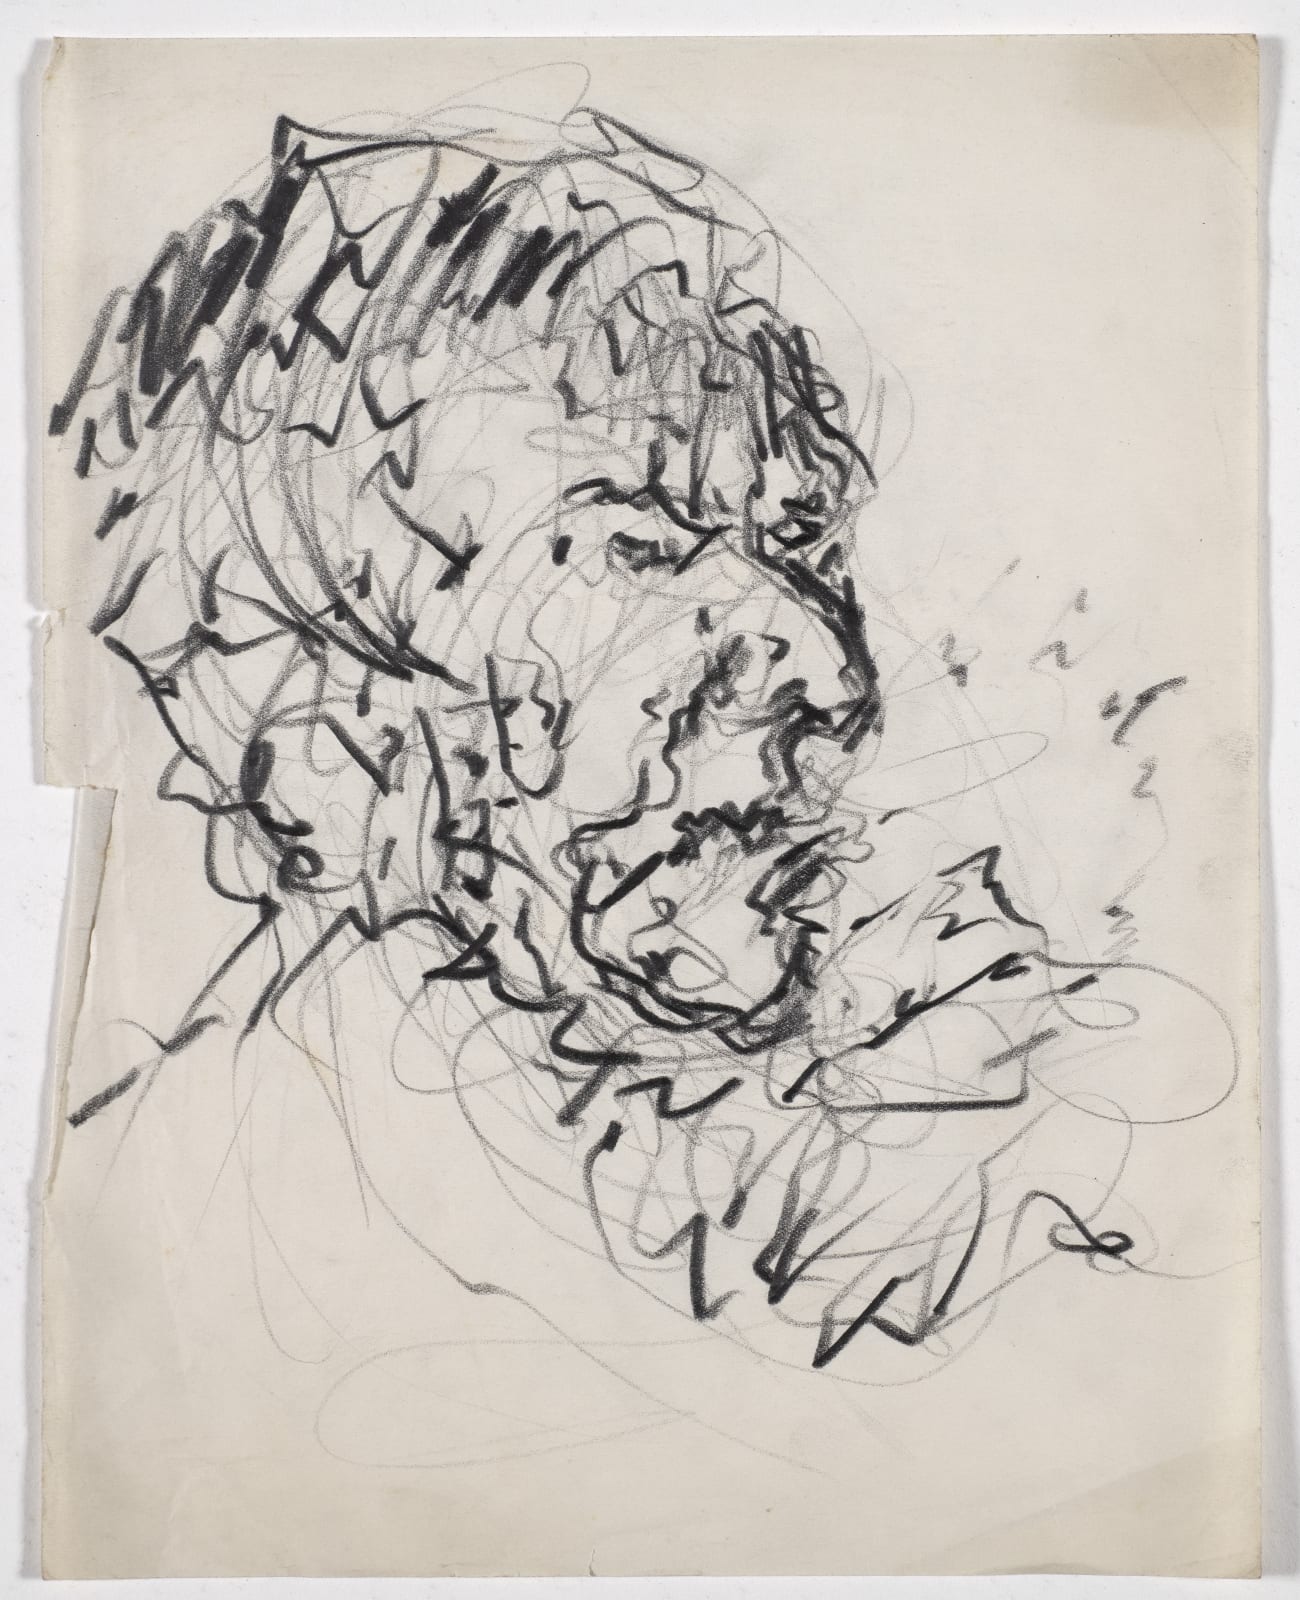 Head of a Man, c. 1948-49 Crayon on paper The Gustav Metzger Foundation